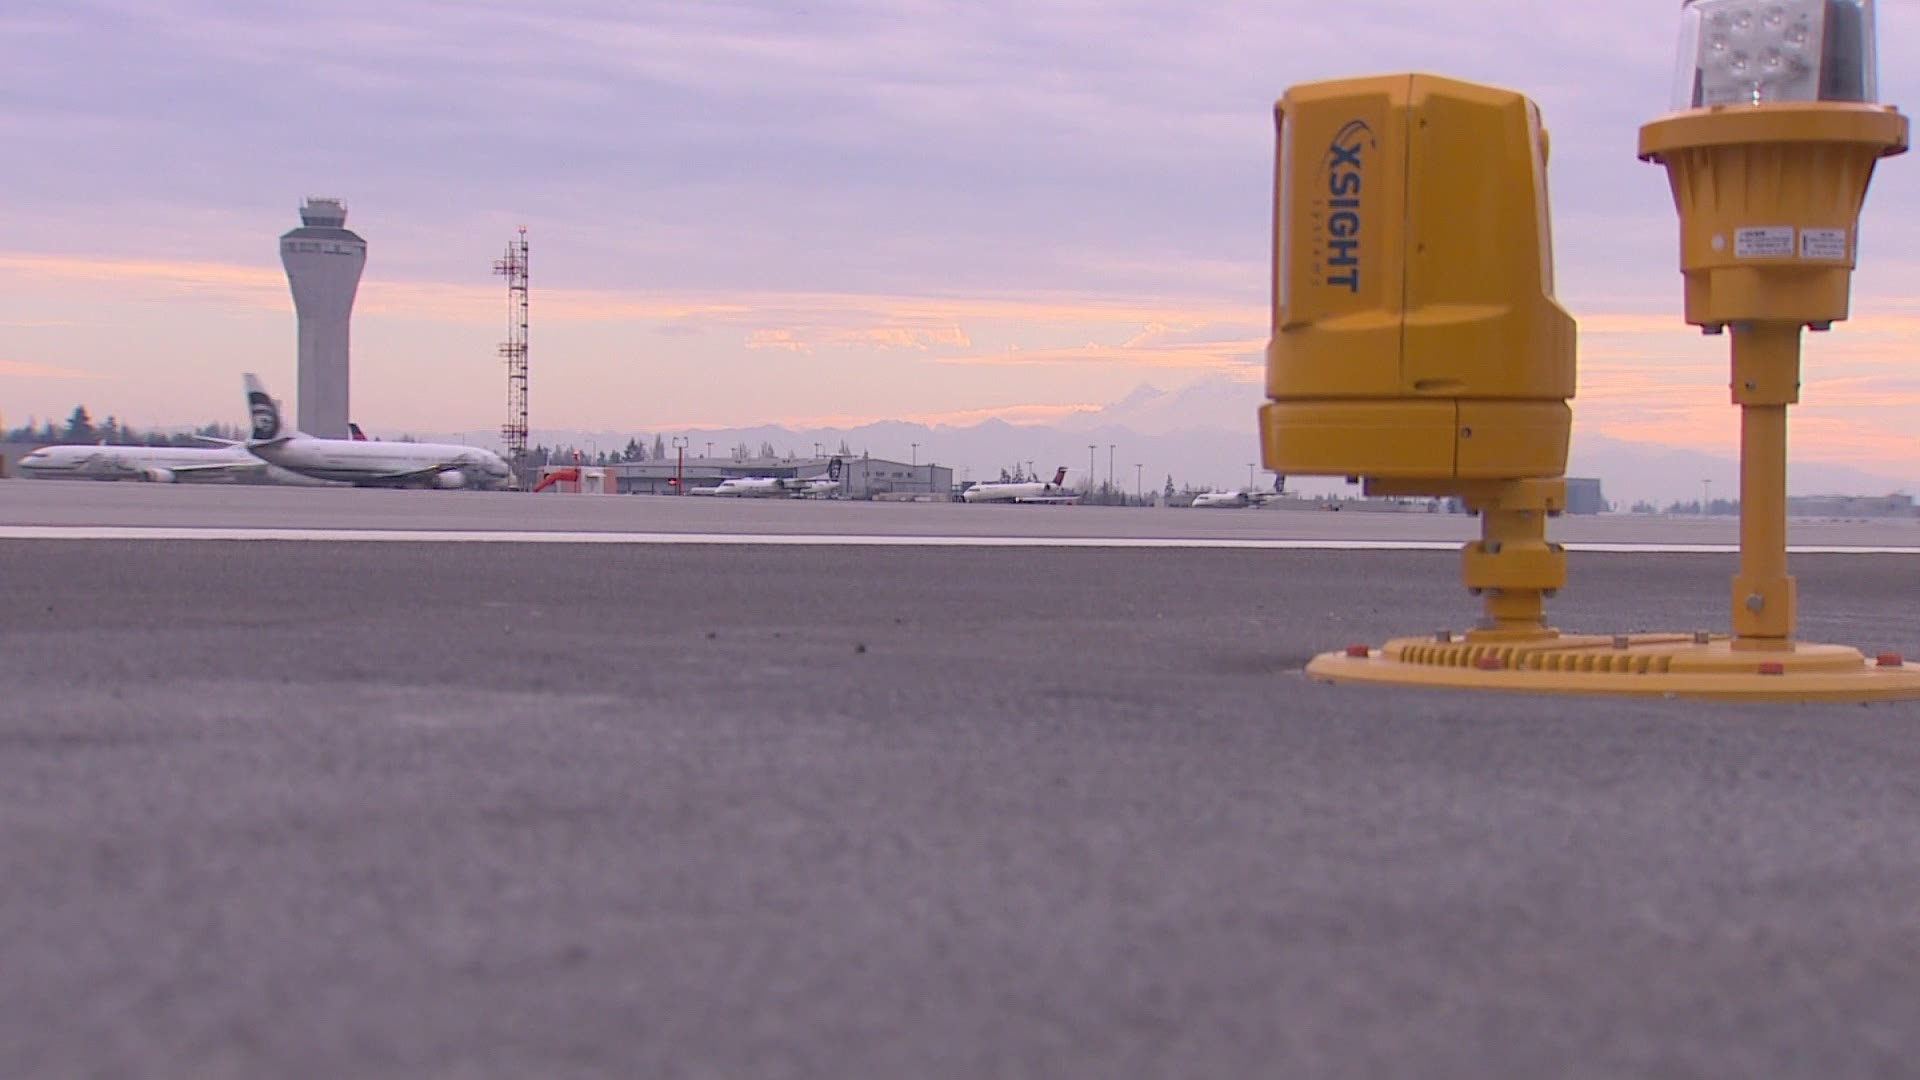 The FAA will test equipment across the country to protect airplanes and airports from drones.